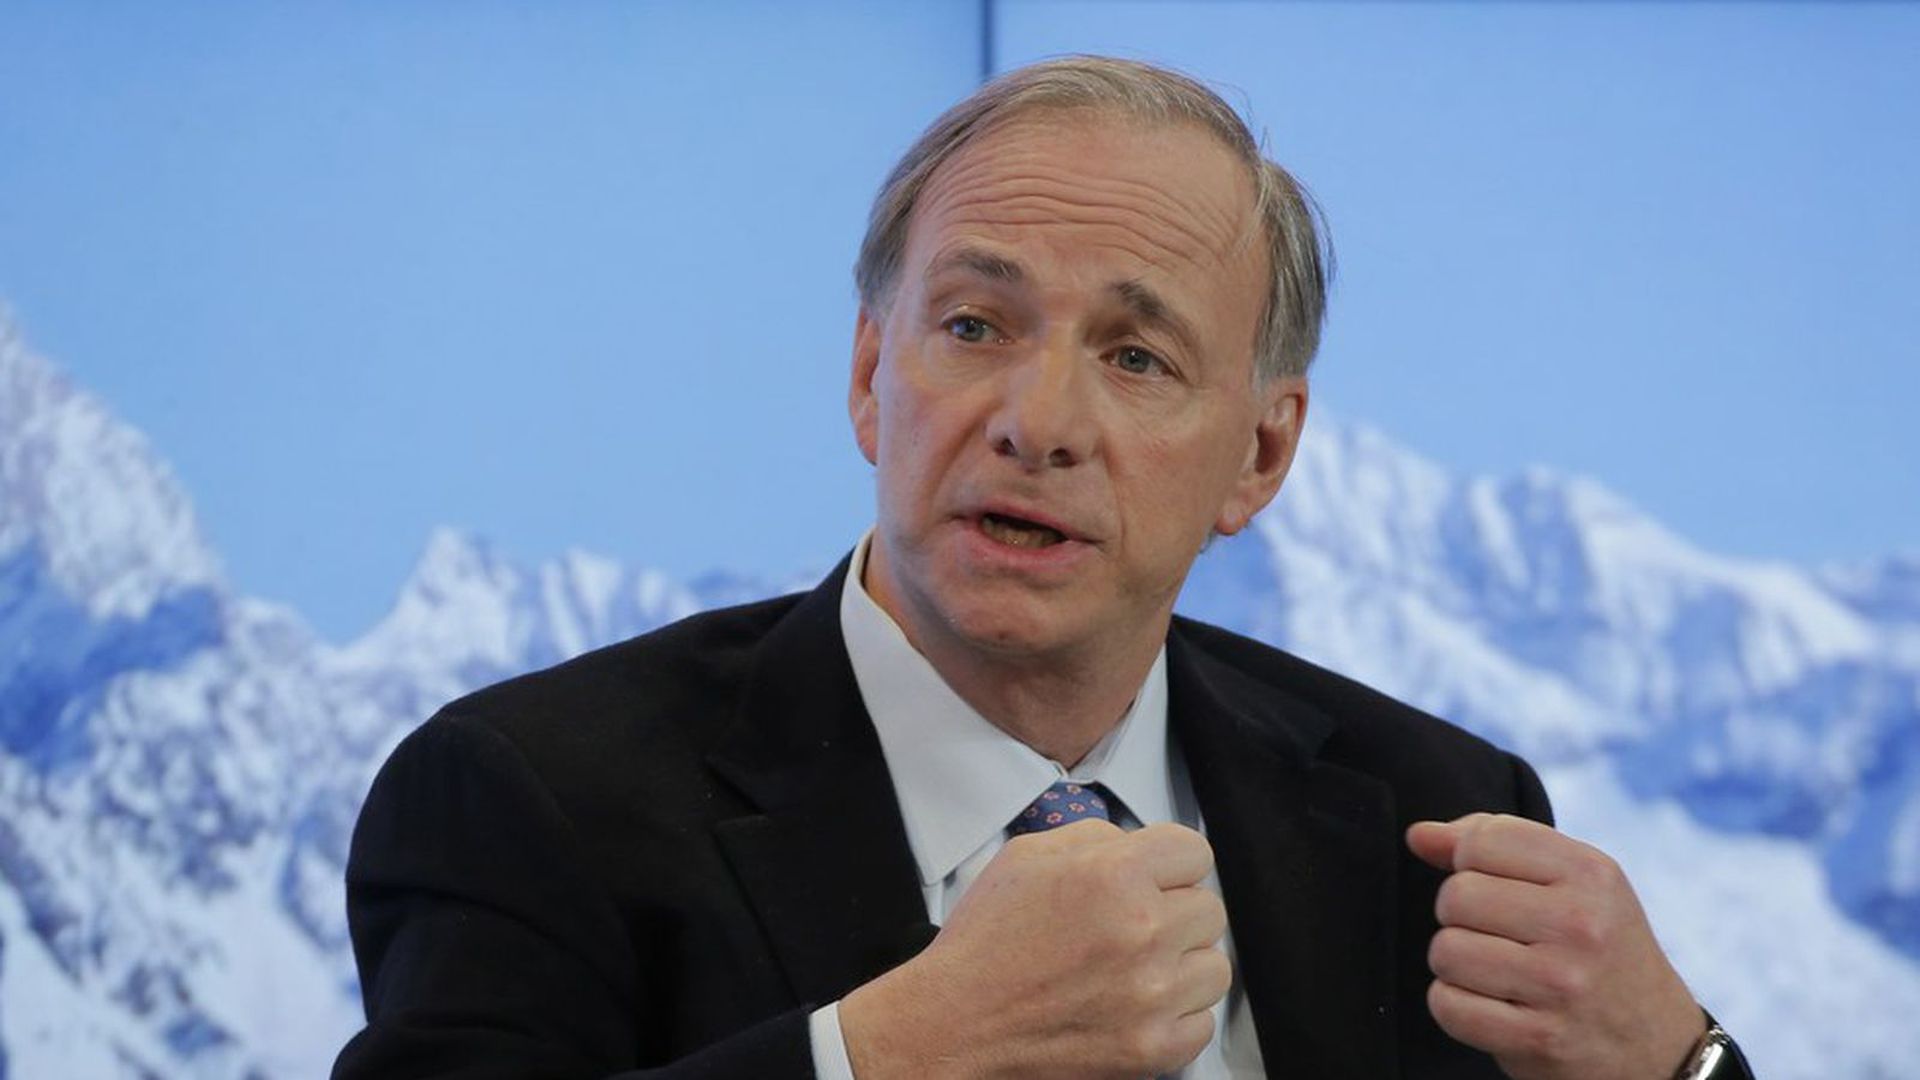 Ray Dalio, founder of Bridgewater Associates, says wealth inequality is a national emergency.